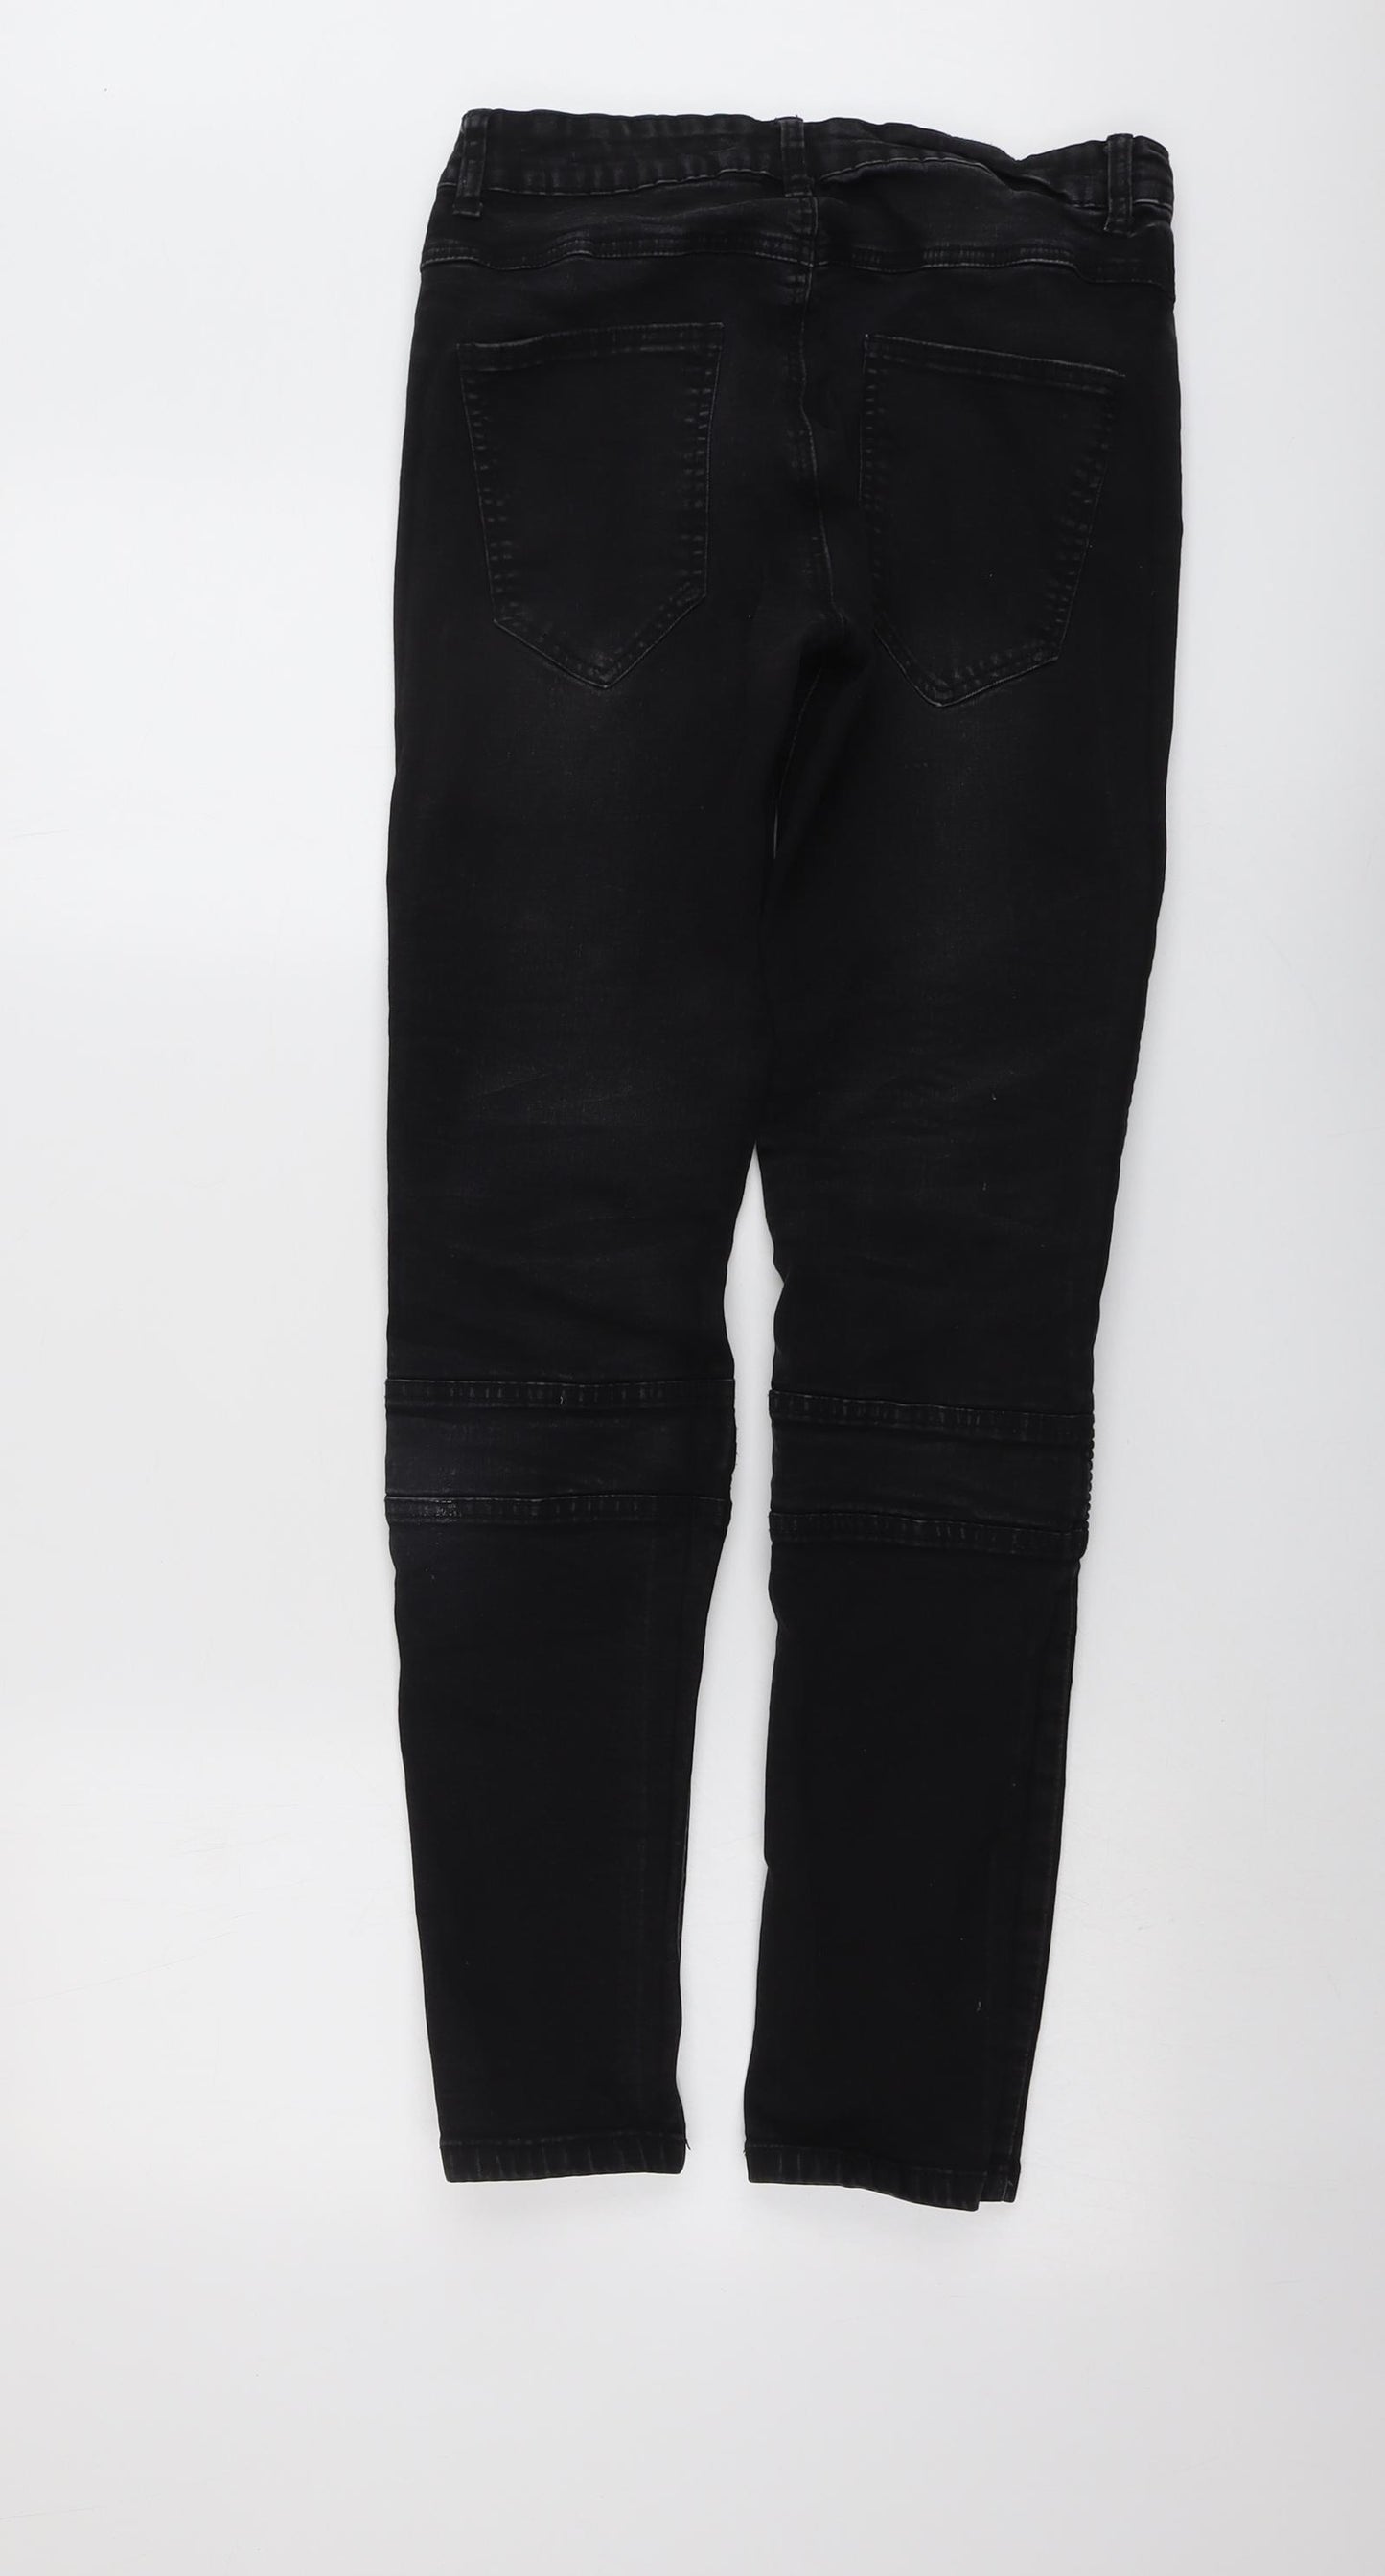 Boohoo Mens Black Cotton Skinny Jeans Size 32 in L30 in Regular Button